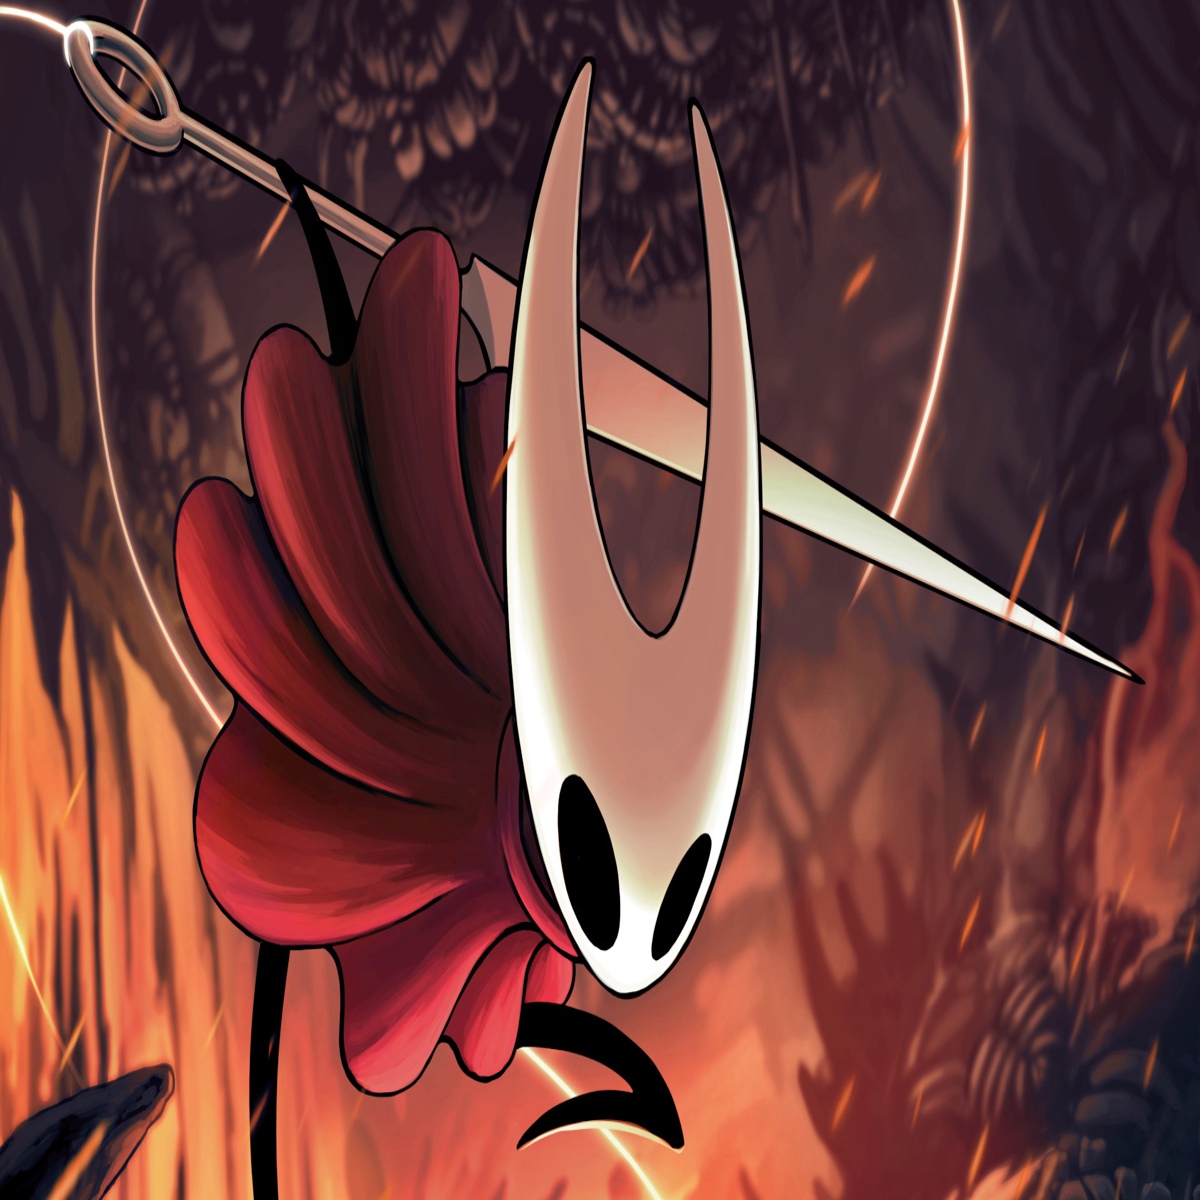 Hollow Knight to be released for PS4 and Xbox One